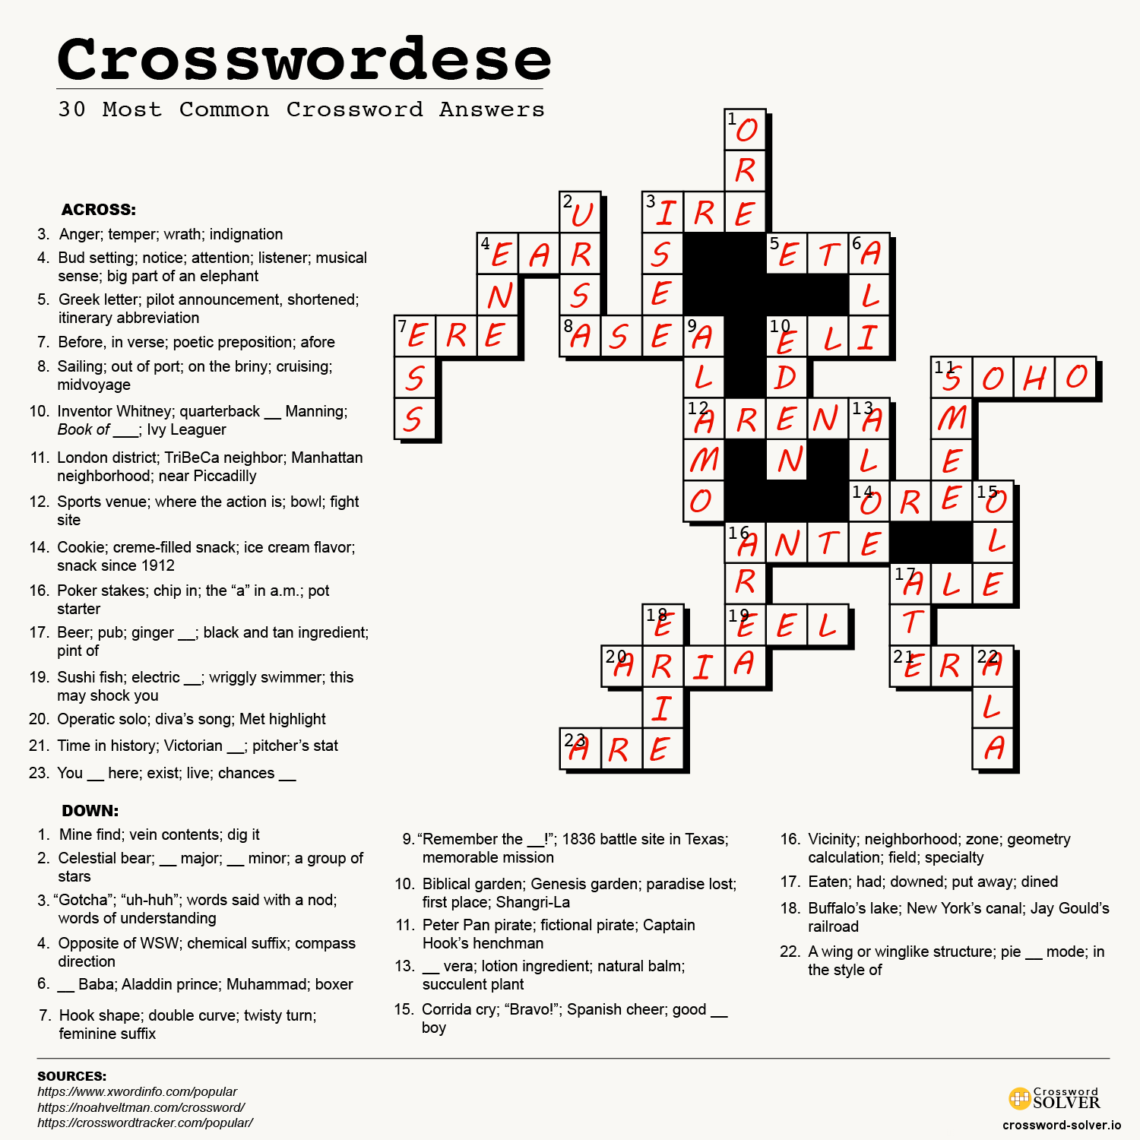 Film Made From Written Work Crossword Clue Answers Details Explained